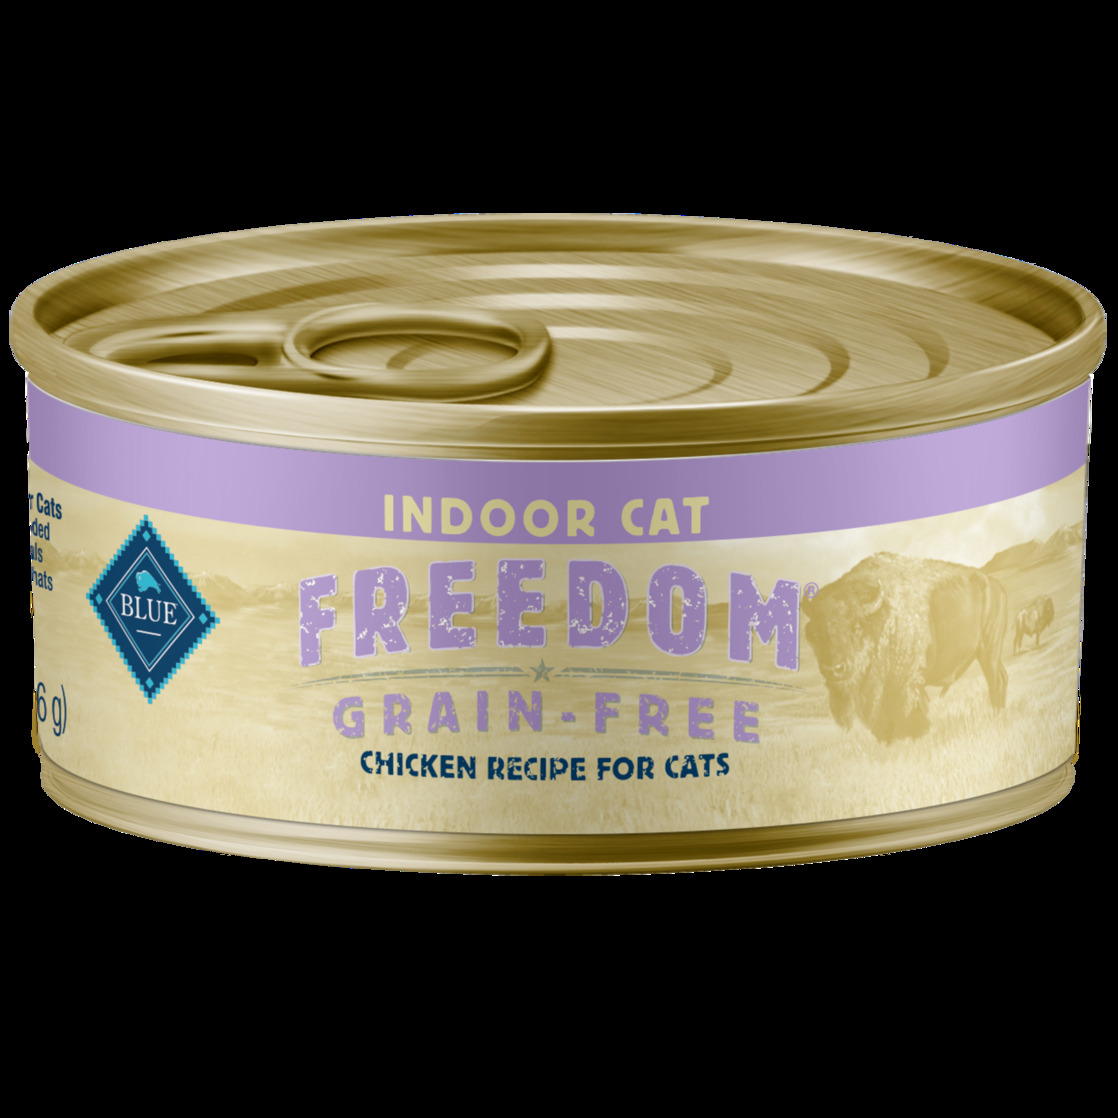 Blue Buffalo Freedom Indoor Chicken Pate Wet Cat Food for Adult Cats, Grain-Free, 5.5 oz. Can - image 1 of 6